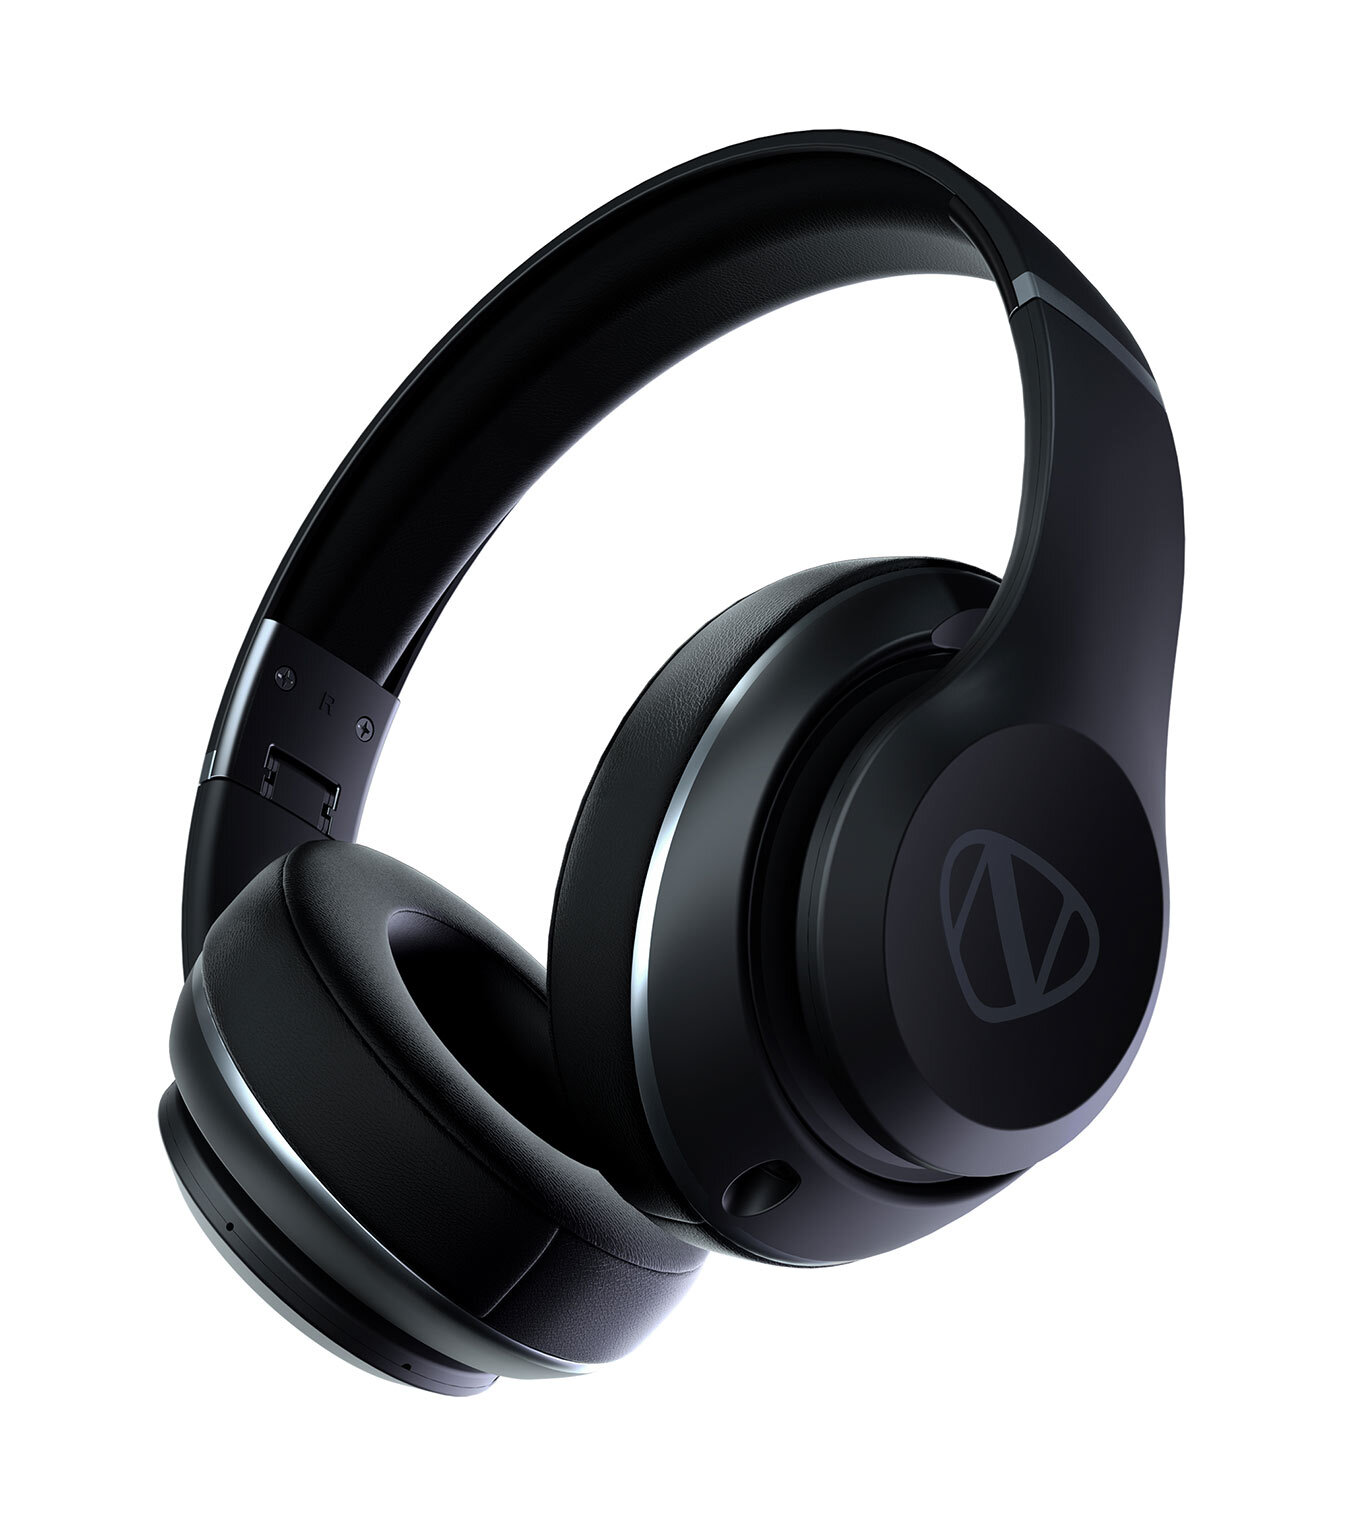 NCredible2 Wireless On-Ear Headphones, Built-in Mic, Wired Mode, Carrying Case - Black/Gunmetal